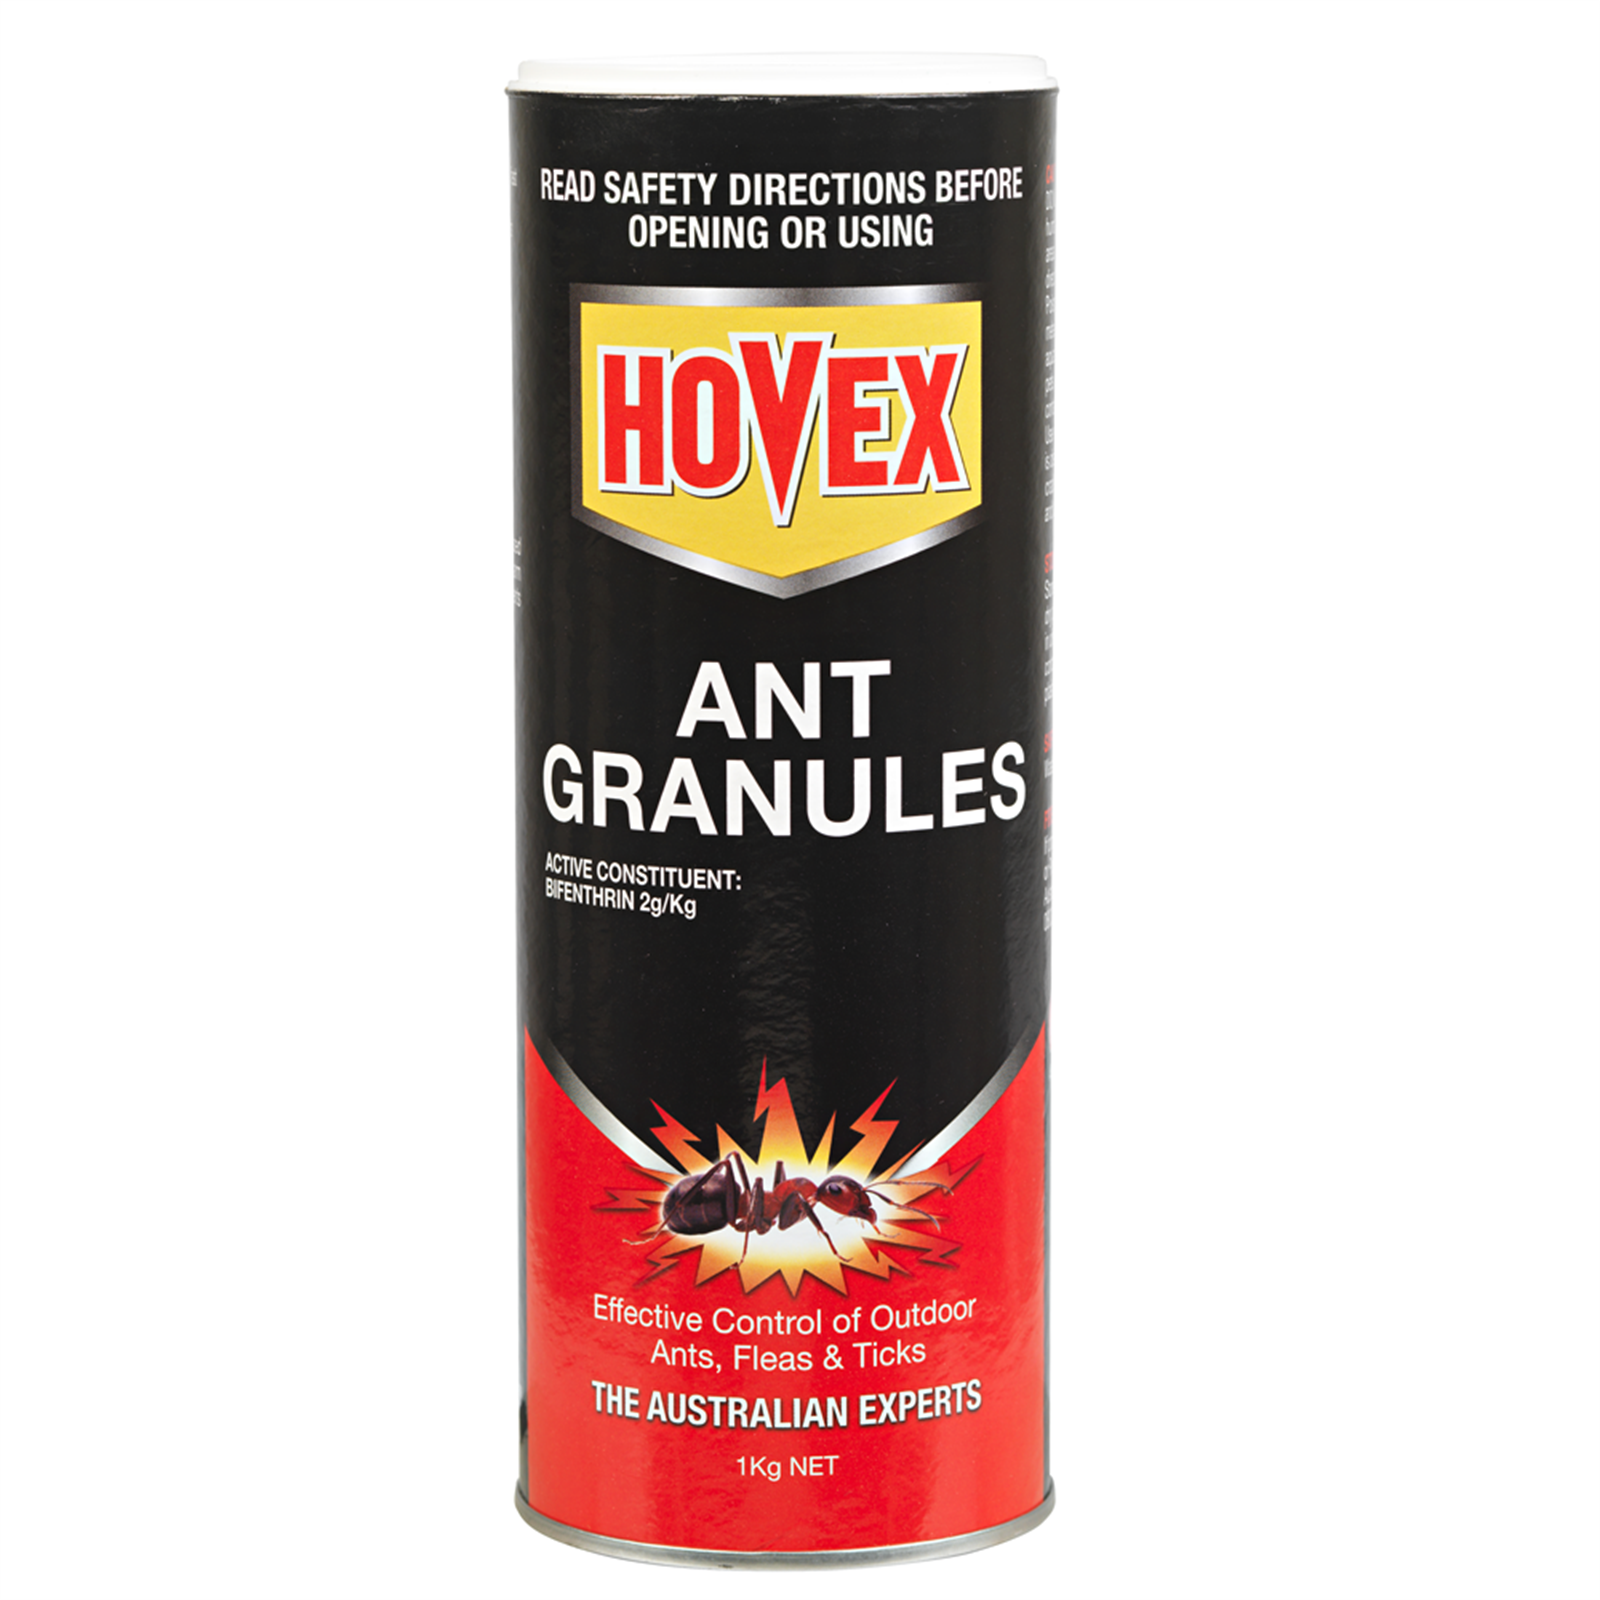 Hovex 1kg Ant Granule Insecticide